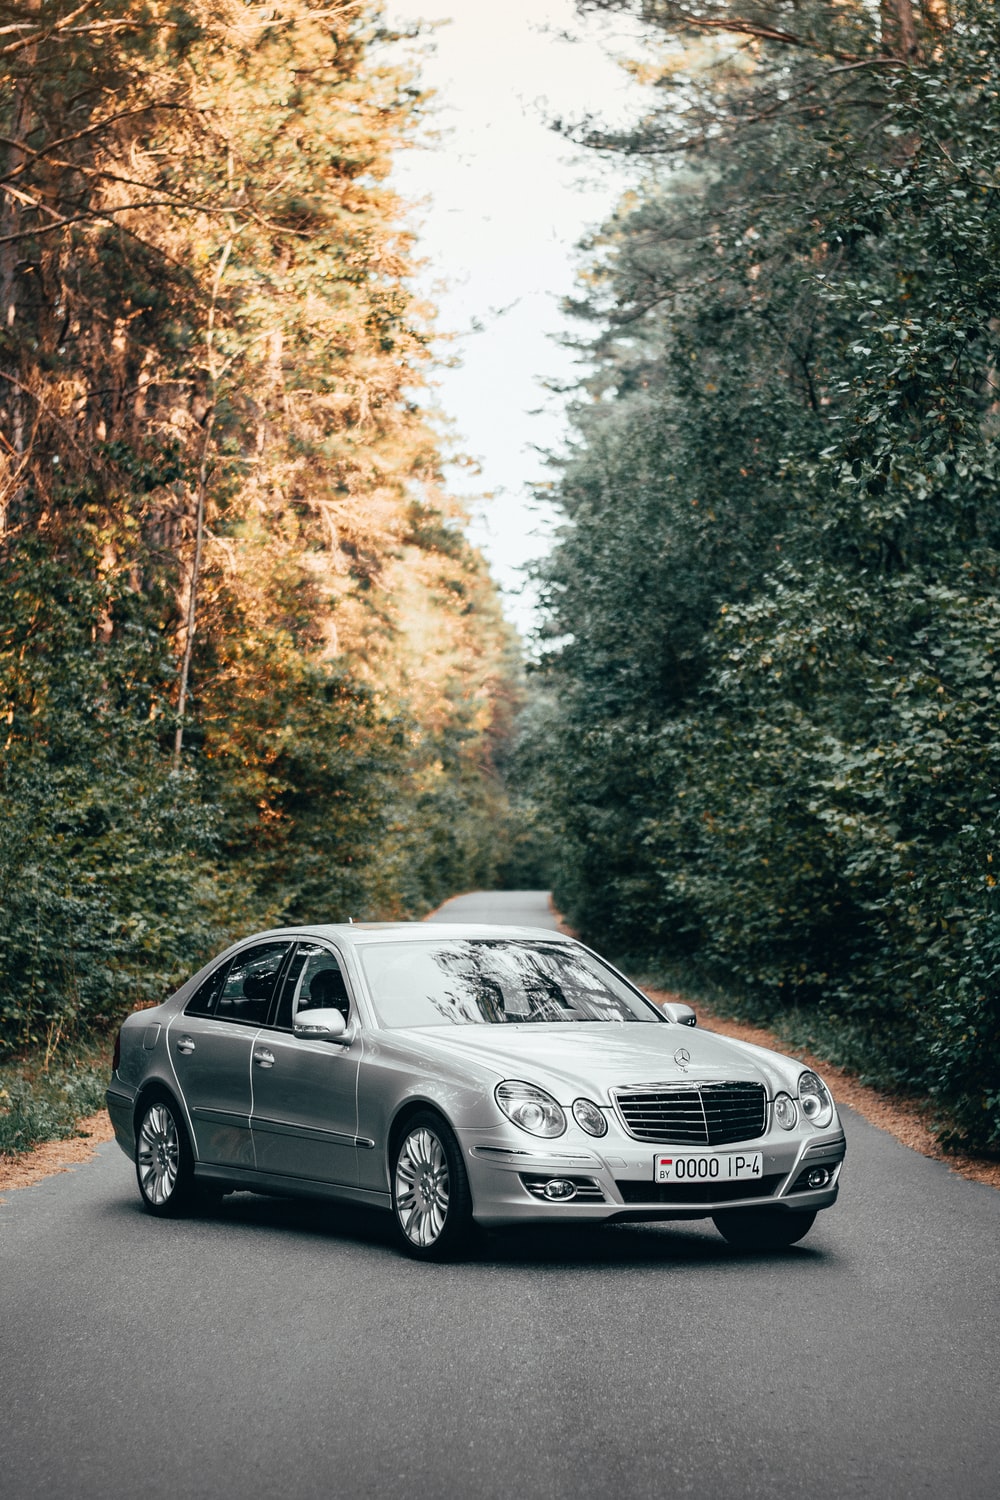 black mercedes benz sedan on road surrounded by trees during daytime photo